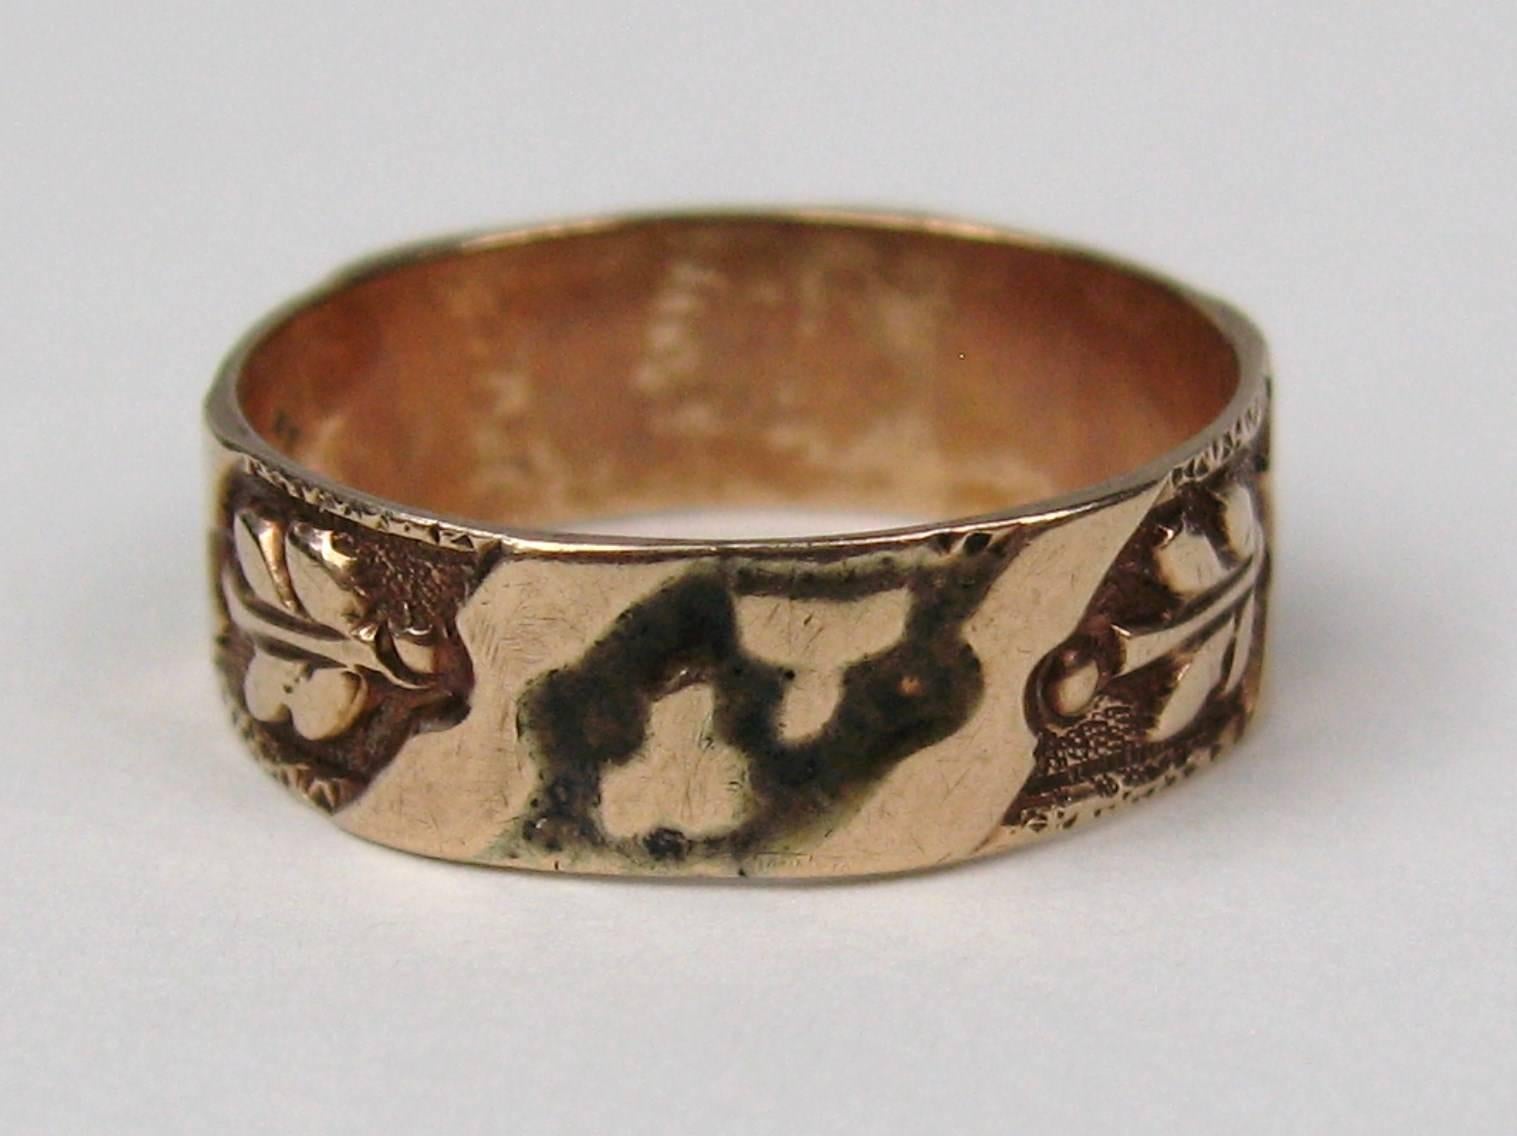 A fantastic 14K Gold antique ring in the form of a buckle. There is a lovely engraved scroll design on the Band. It is .25 in wide. It is a size 7.5 and can be sized by us or your jeweler. Be sure to check our storefront for more fabulous pieces